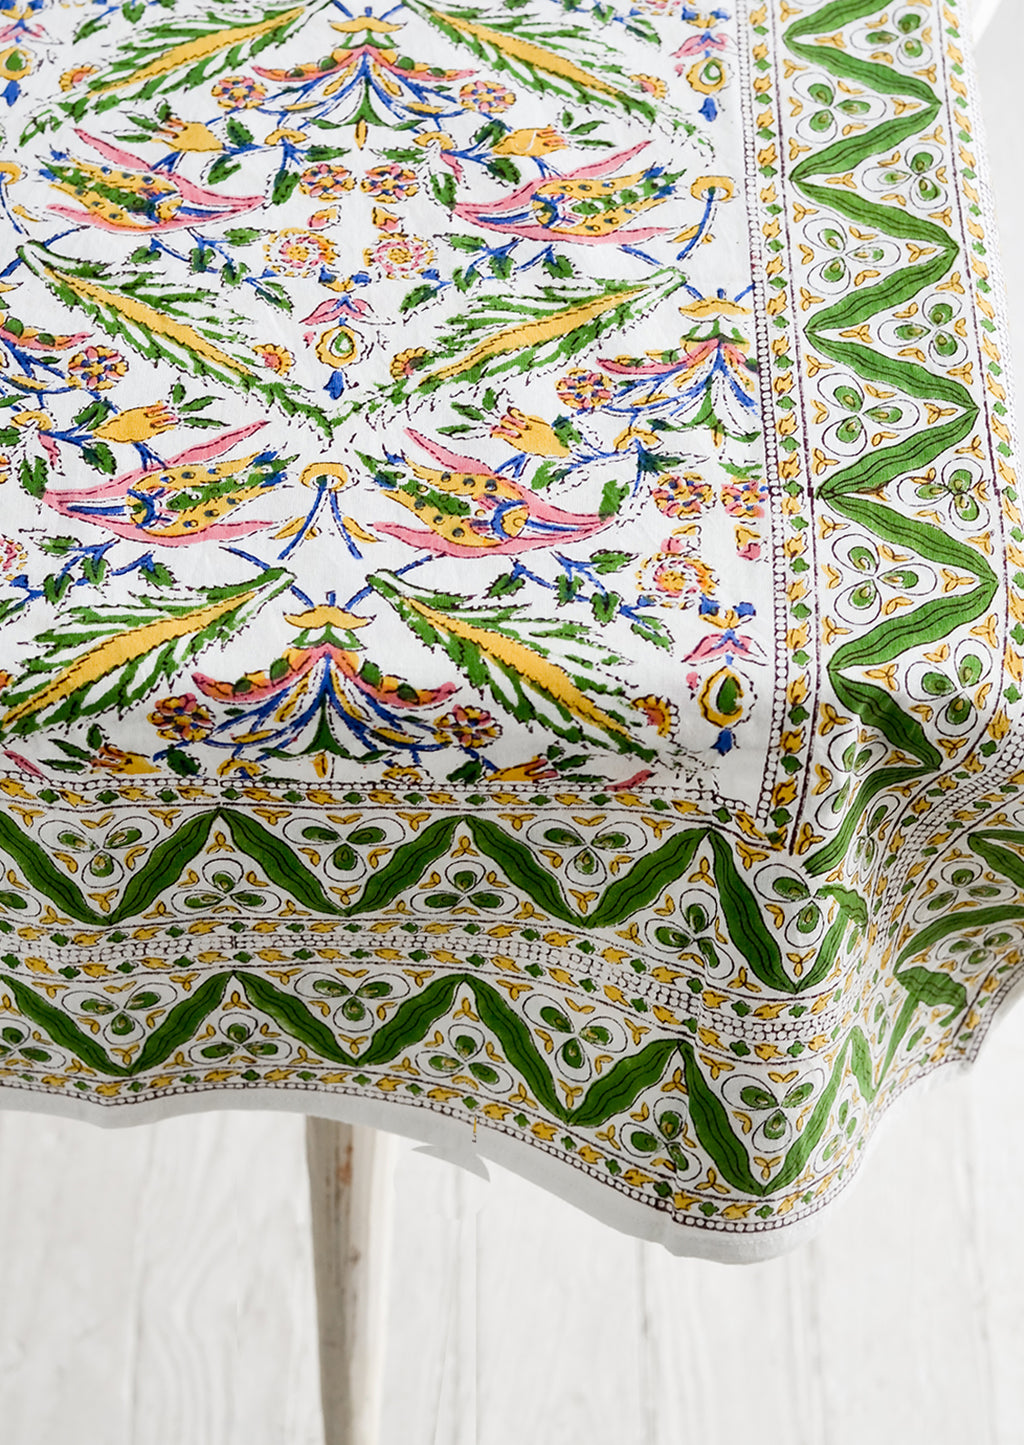 2: A block printed cotton tablecloth in vibrant green, pink and yellow floral pattern.